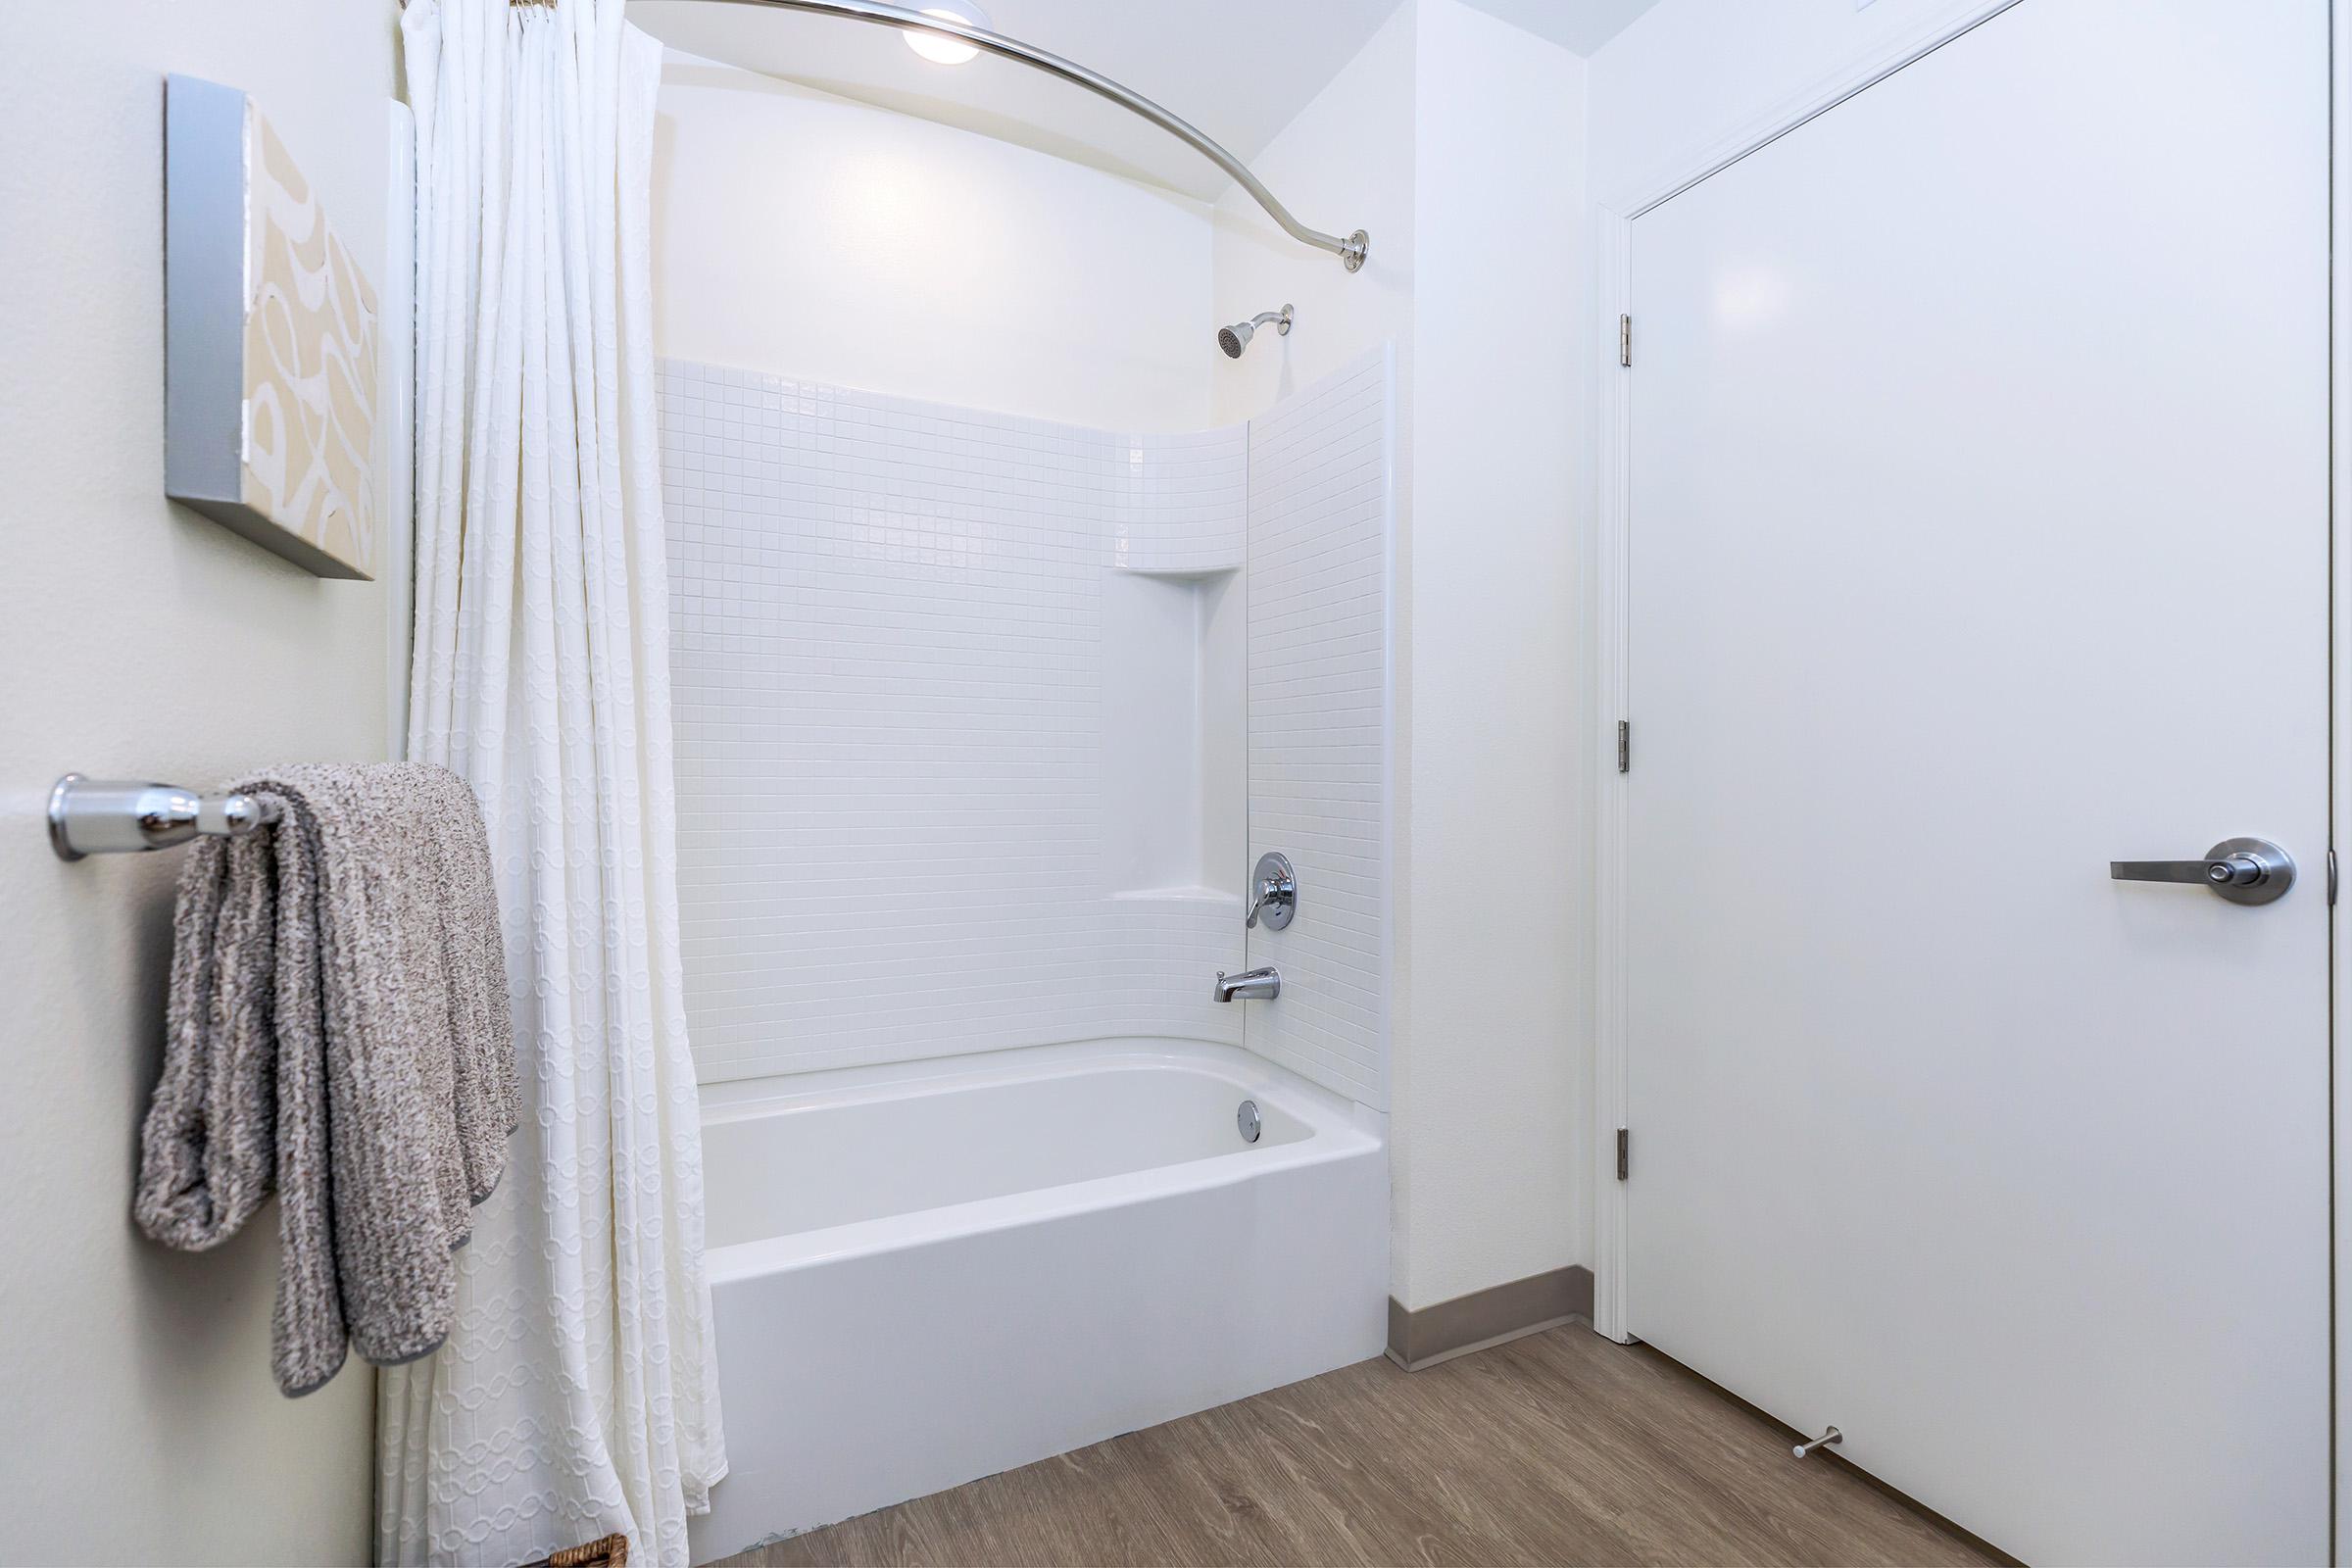 Daly City IL Apartments-Brunswick Street Bathroom with Well Lit and Spacious Vanity, Large Shower Area, and Plenty of Storage Space